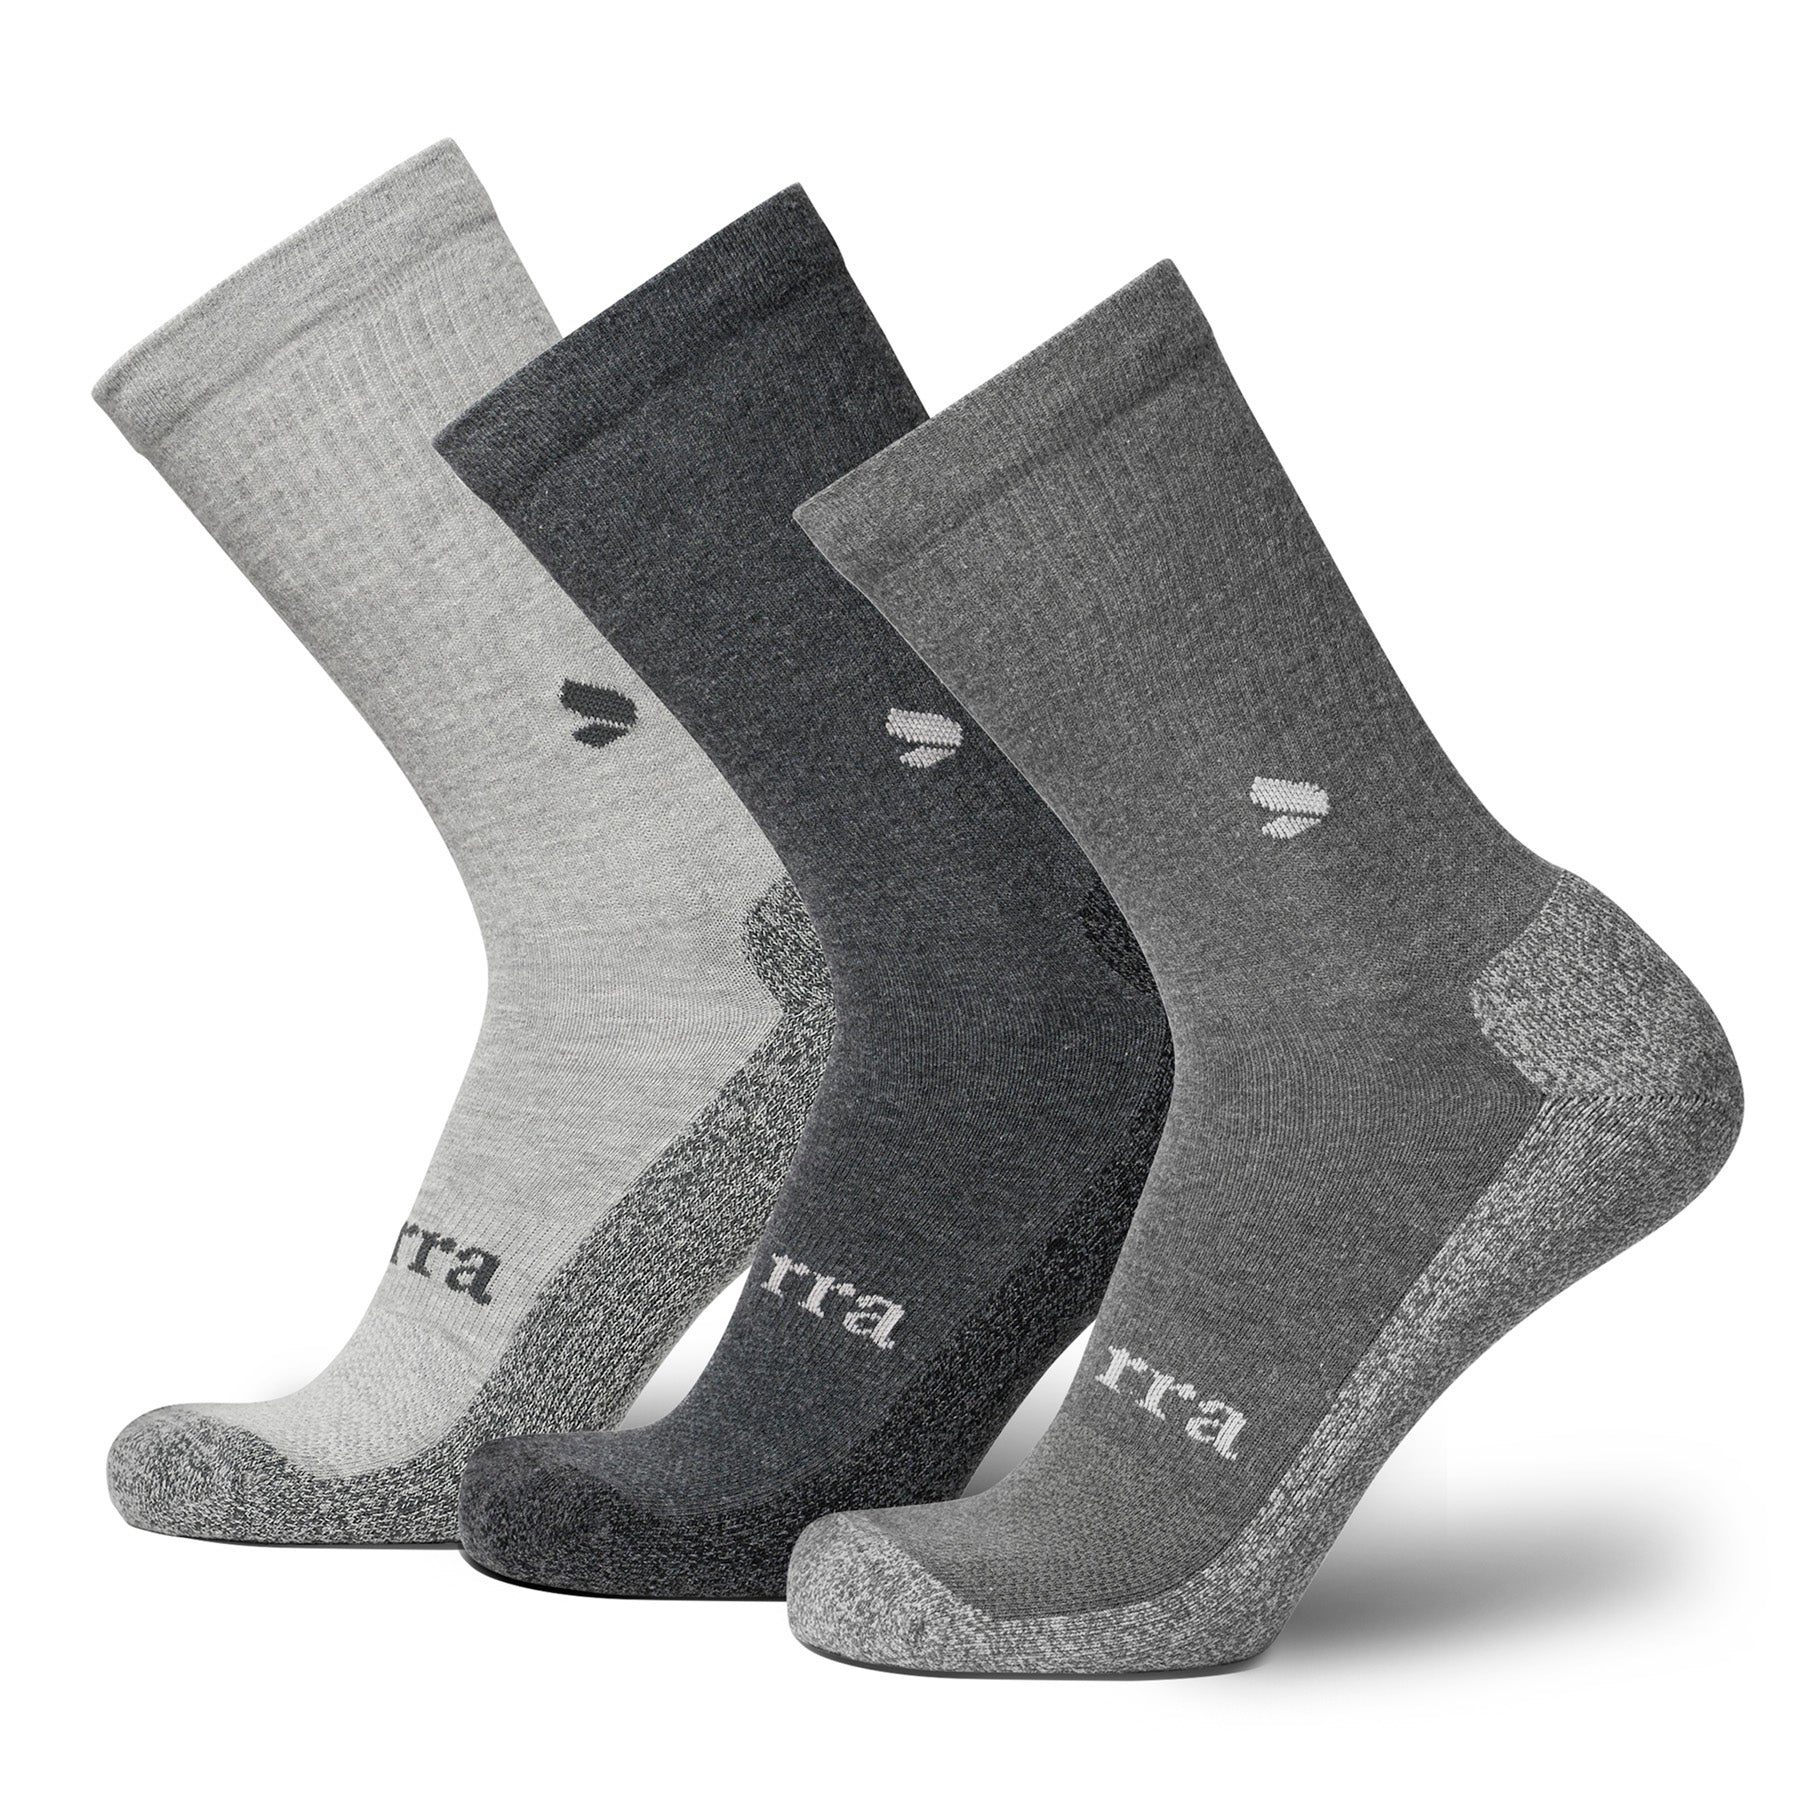 Blue Mountain Men's Cushioned Over-the-Calf Socks, Large, Gray, 6